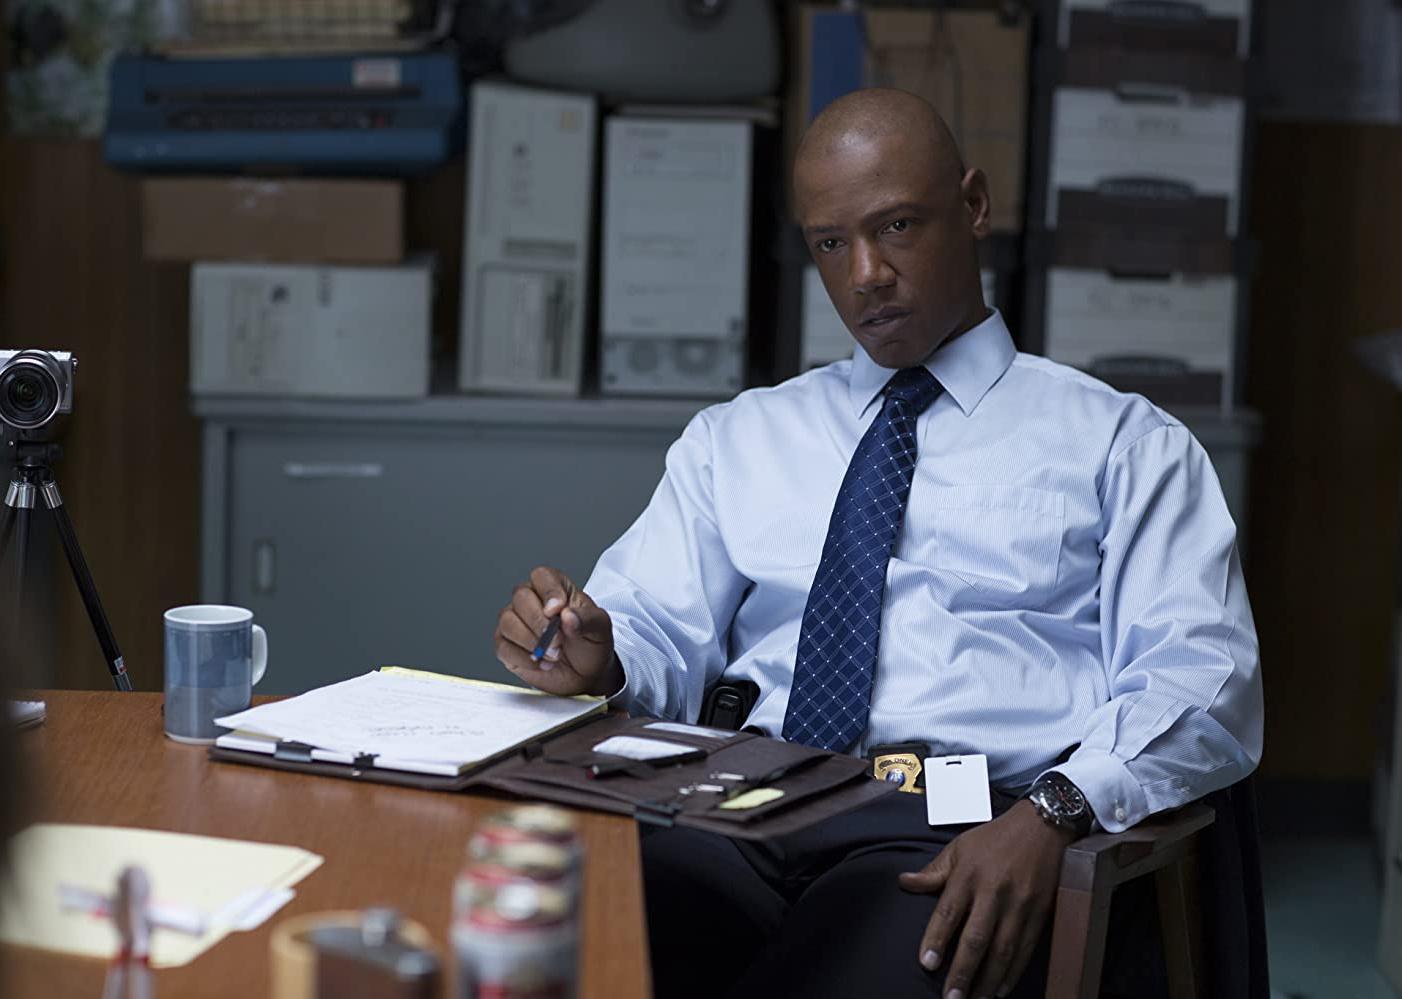 A police detective wearing a blue button down shirt and tie at a desk.